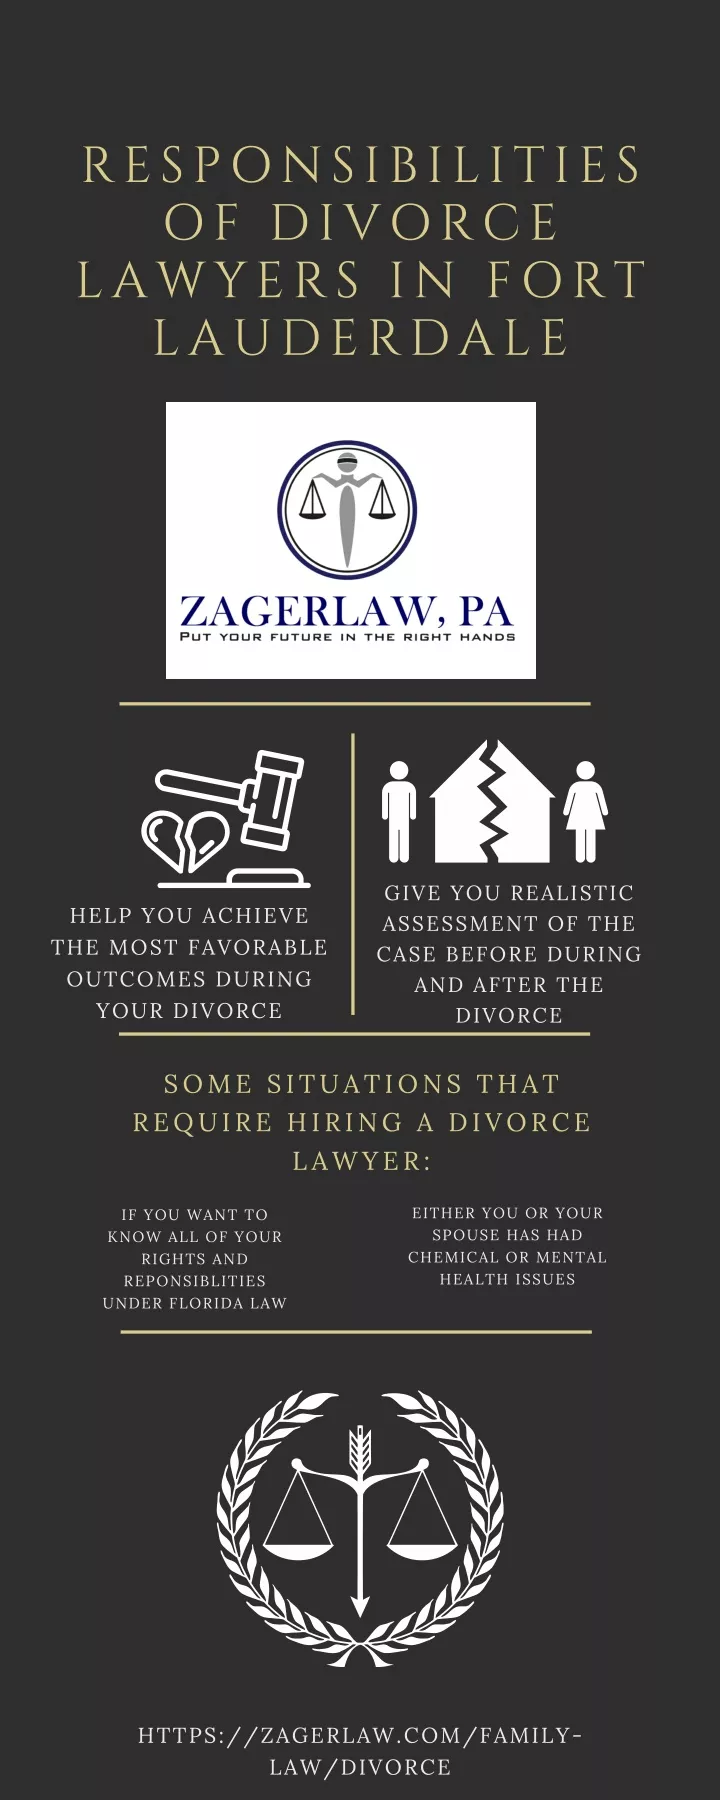 responsibilities of divorce lawyers in fort